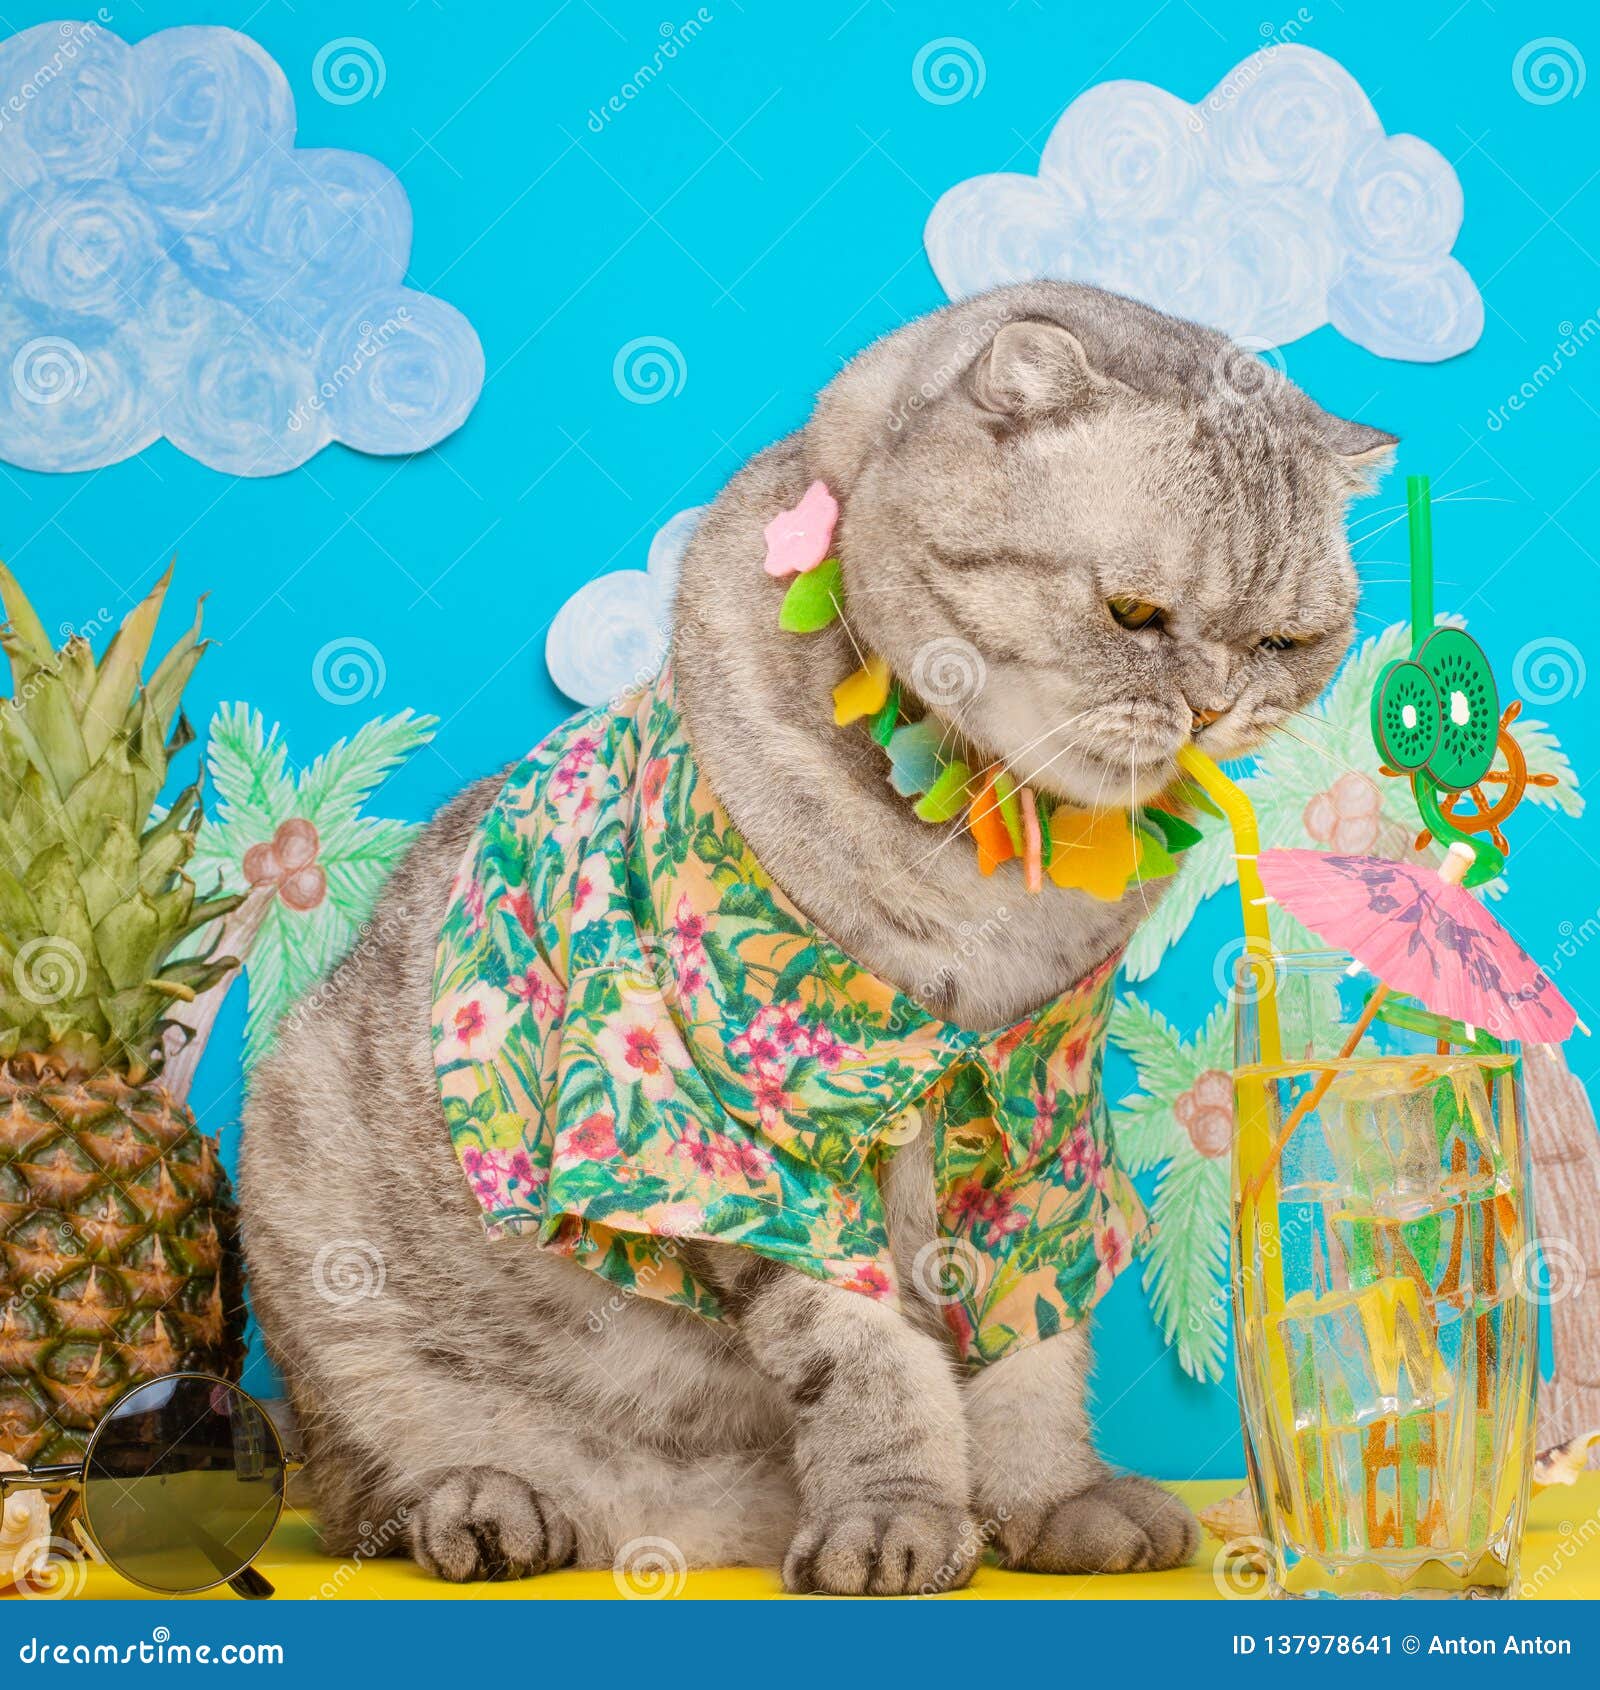 A Cat On Vacation In A Hawaiian Shirt With Pineapples And ...